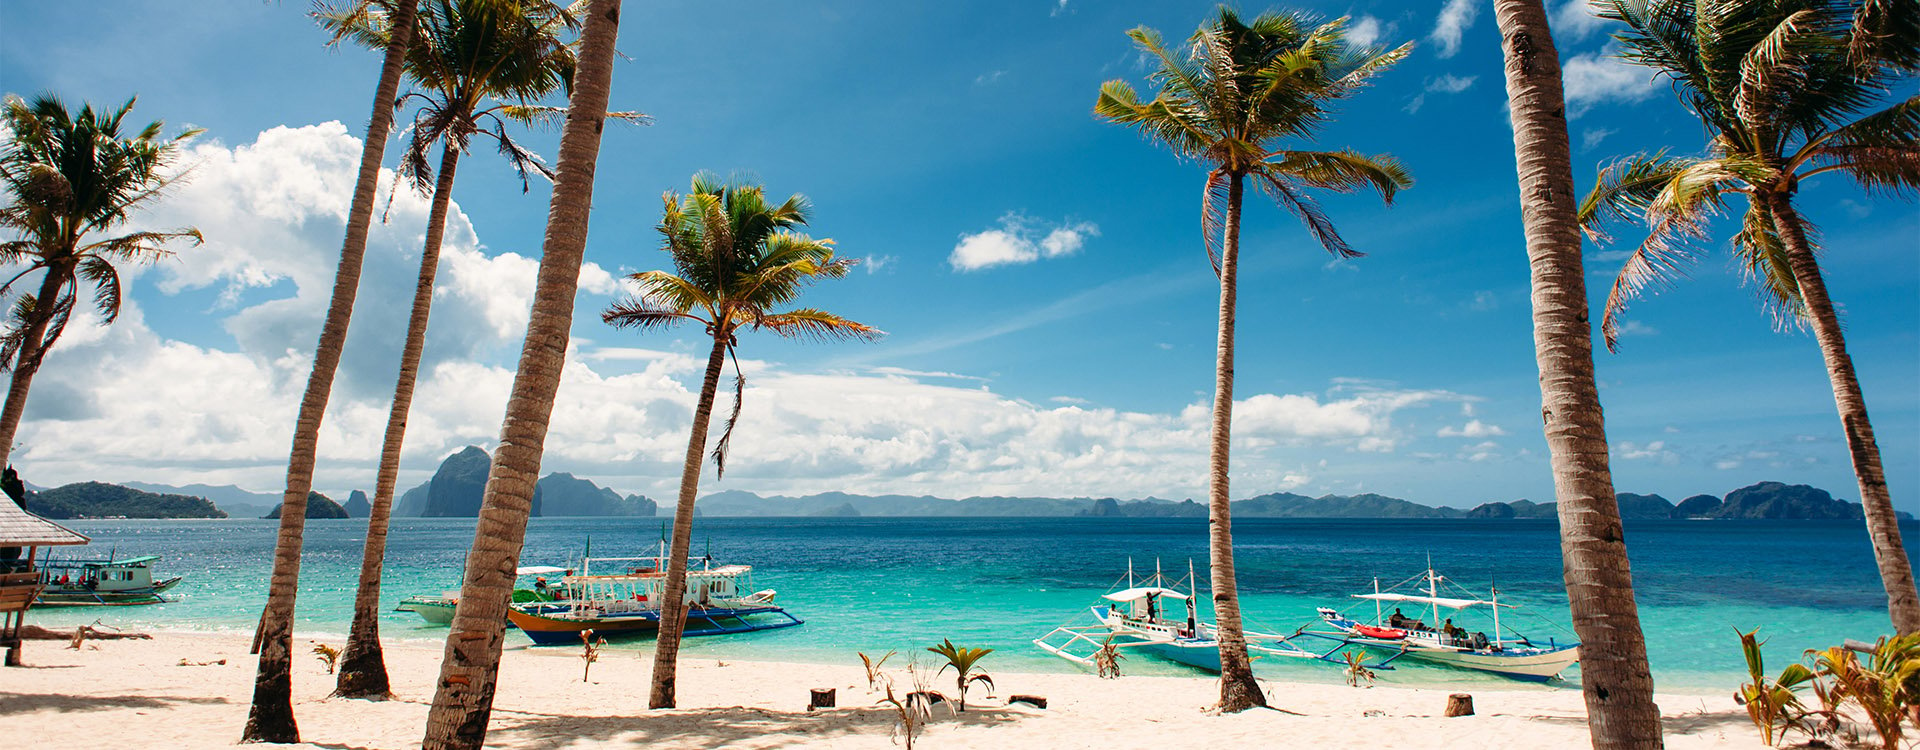 Tropical beach with palm trees, boats, blue sky and white sand Philippines, El Nido